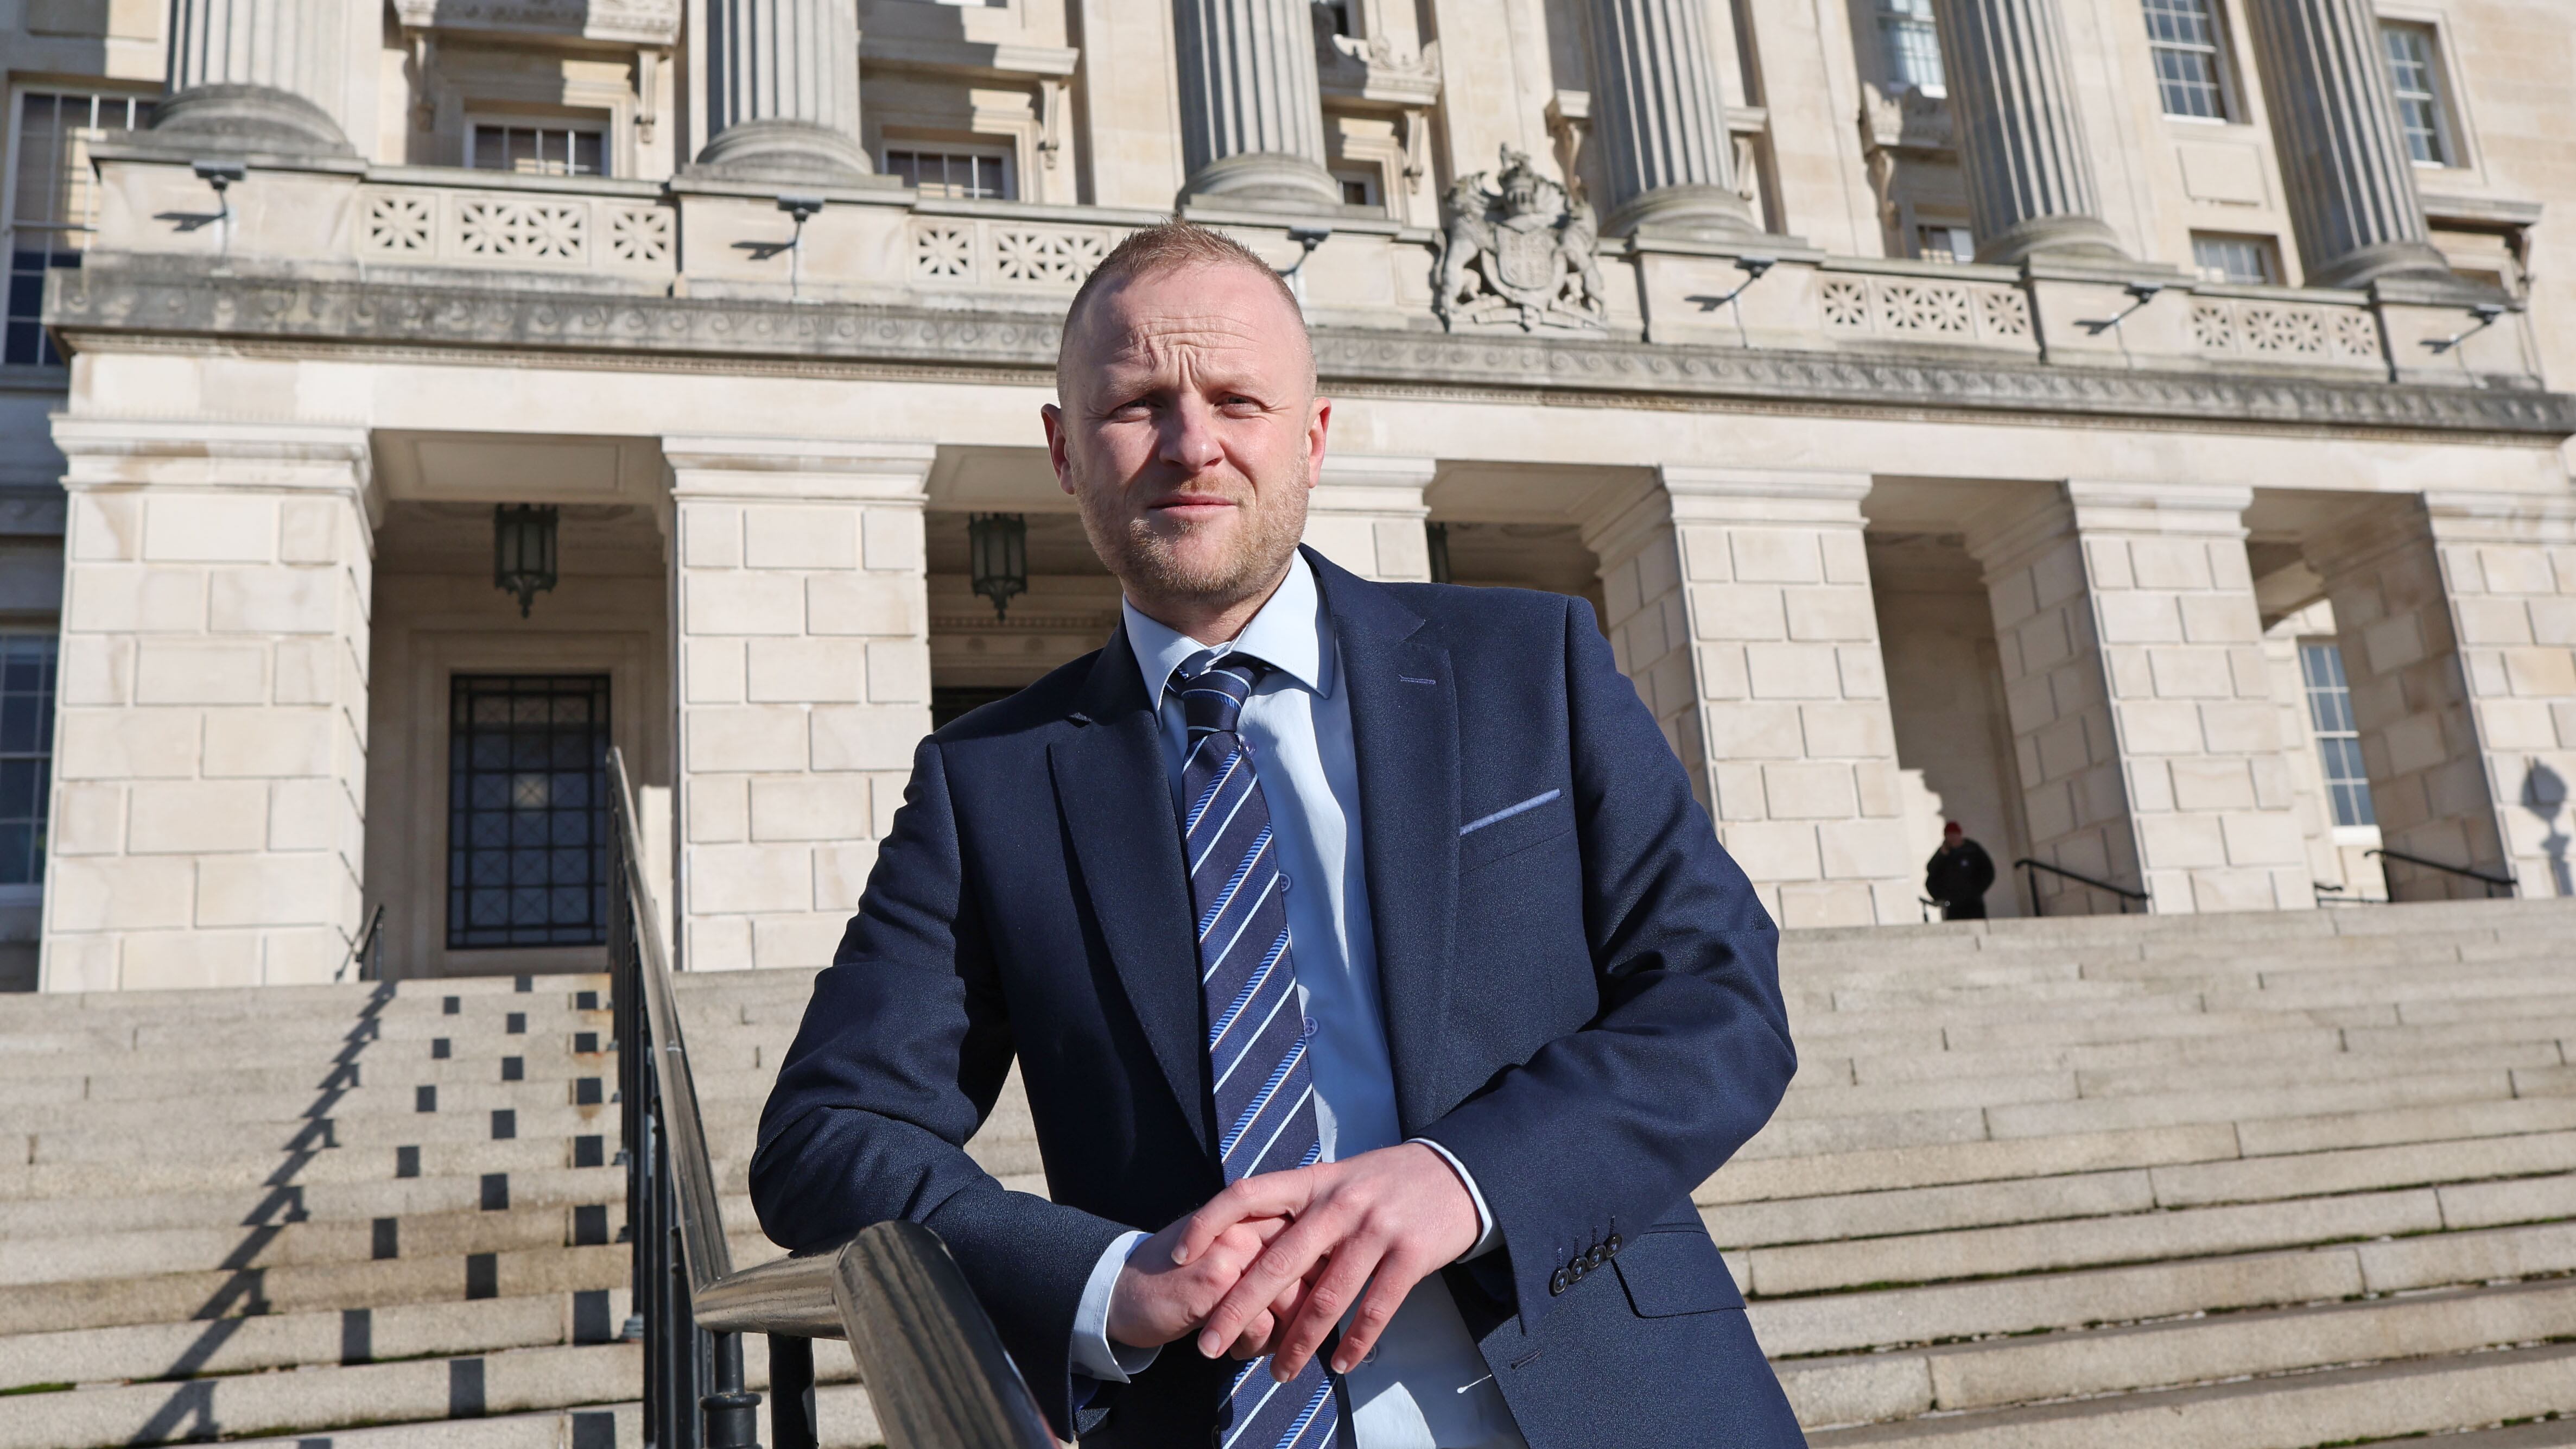 Jamie Bryson at Stormont  on Tuesday, after  the DUP's agreement to return to the NI Assembly - after agreeing to a package of measures put forward by the government.
PICTURE: COLM LENAGHAN